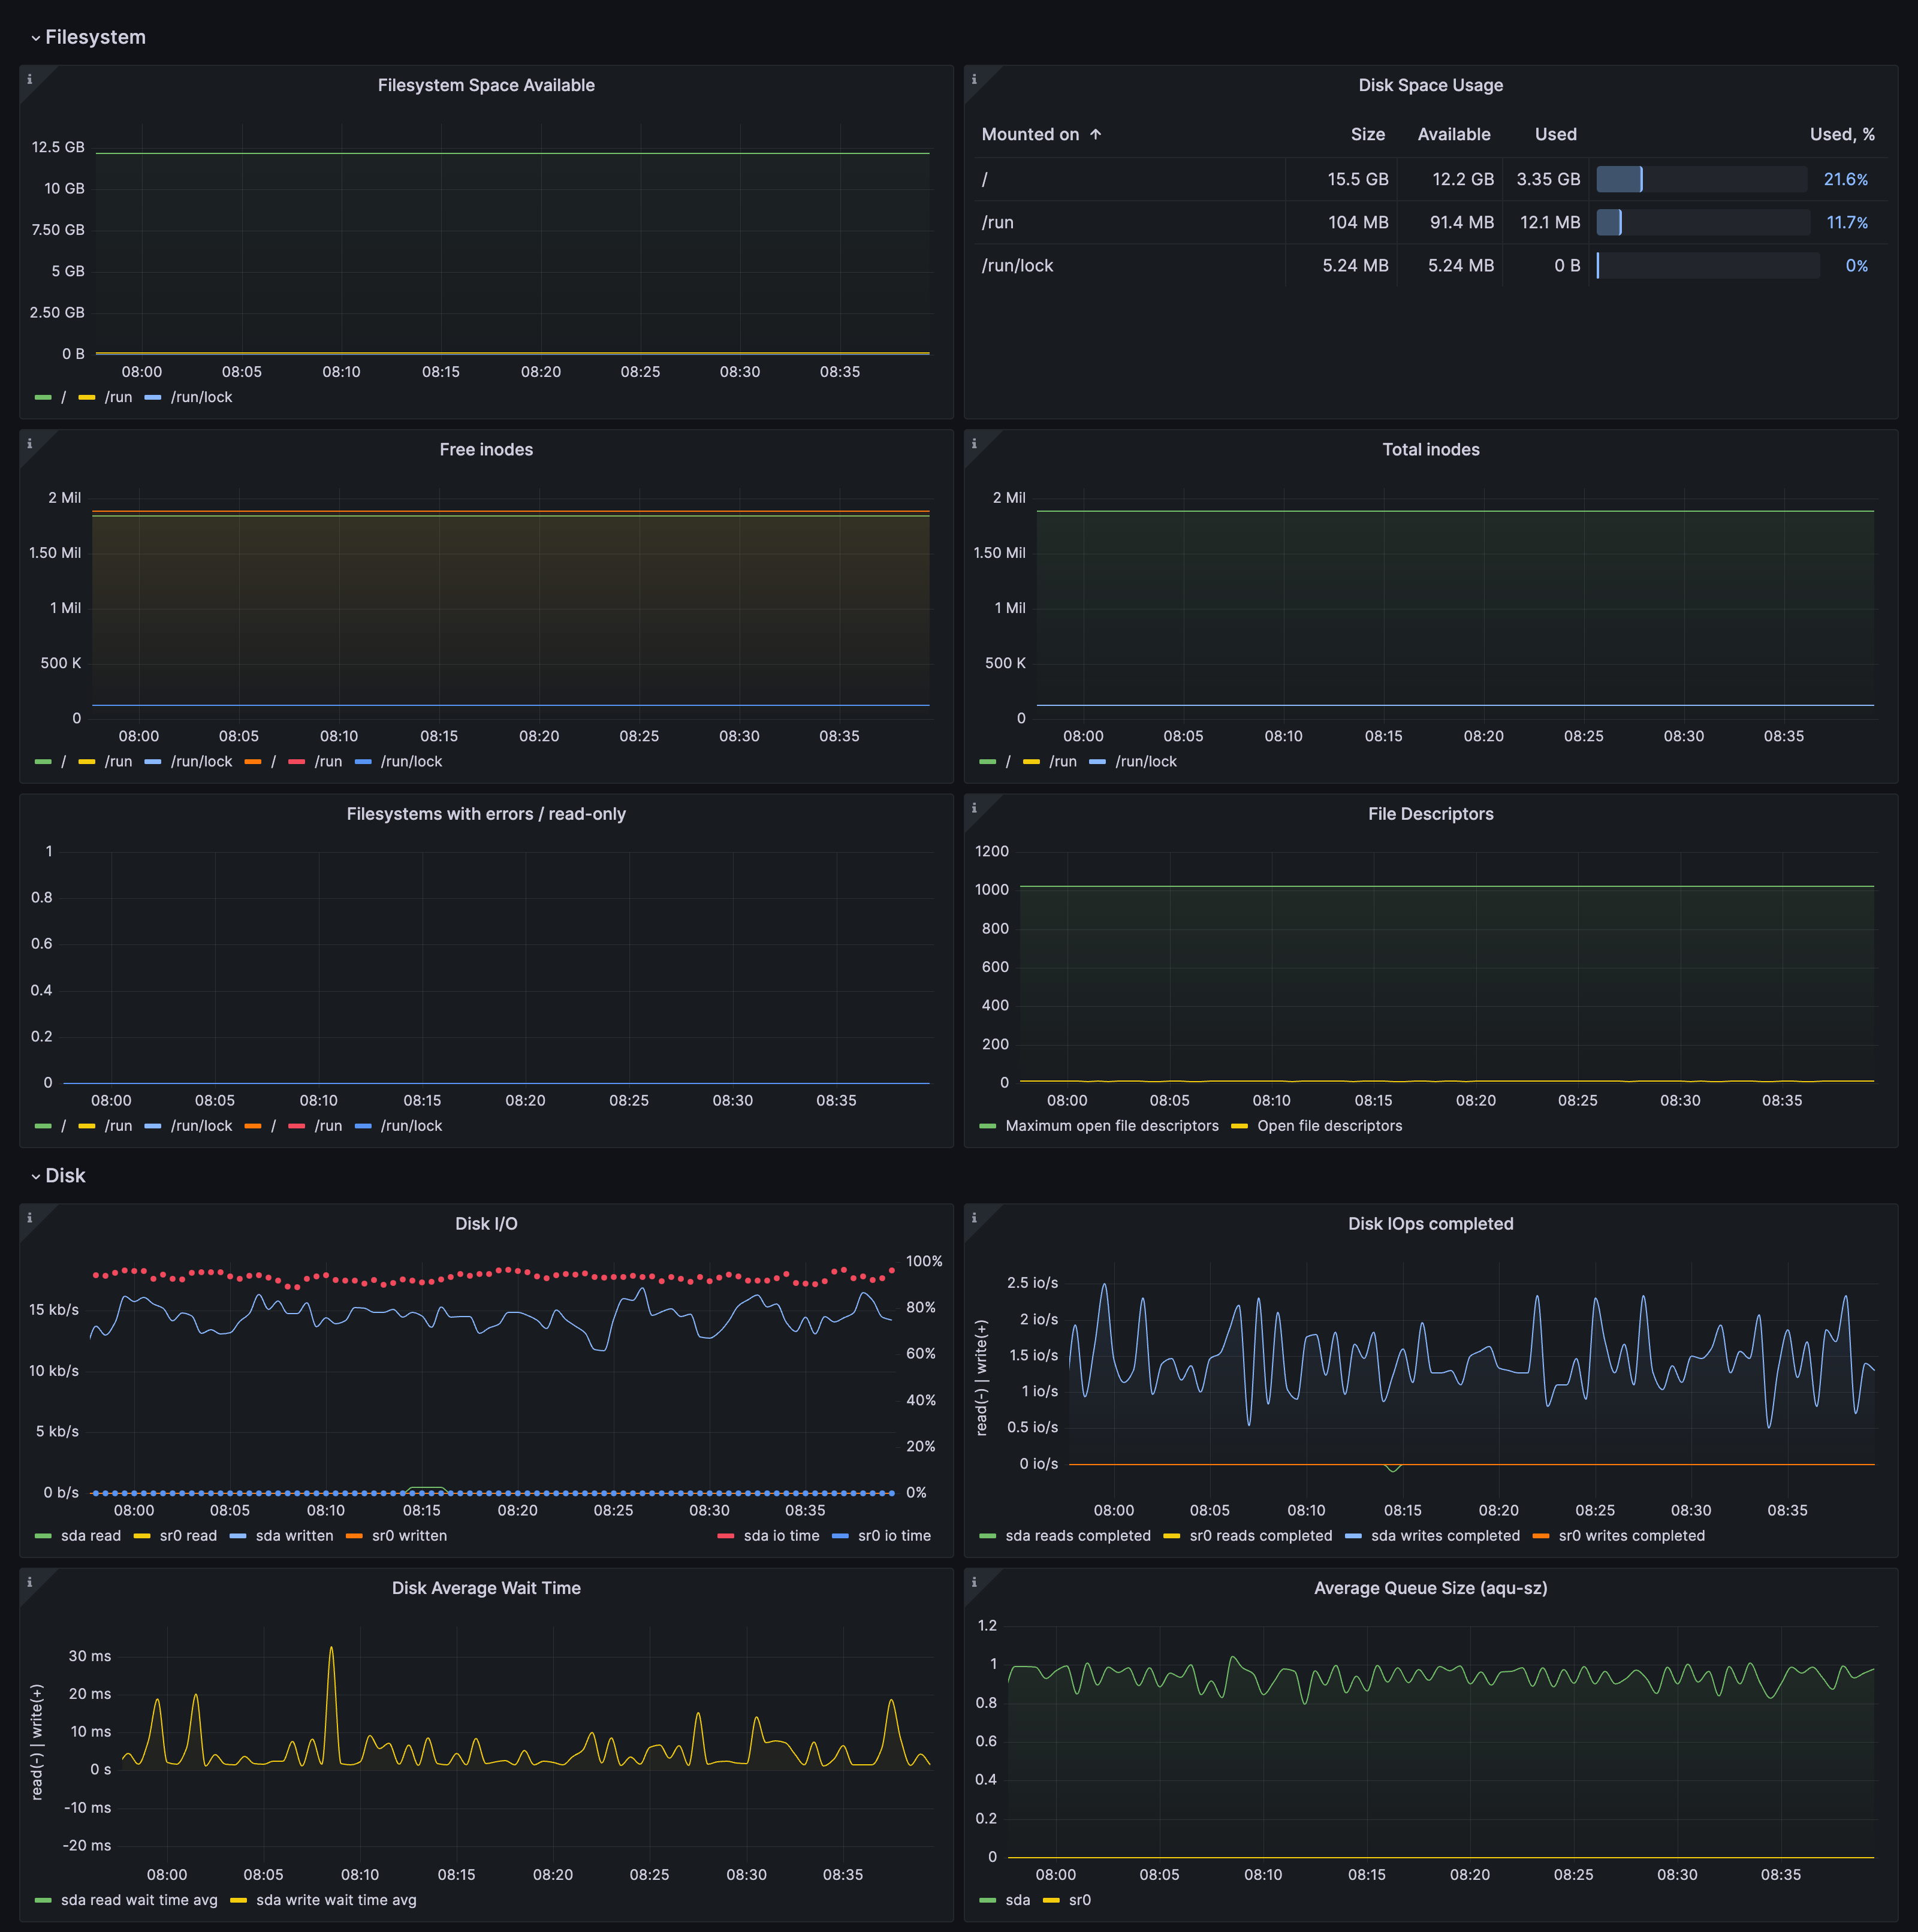 Drill down dashboards: Disks and filesystems